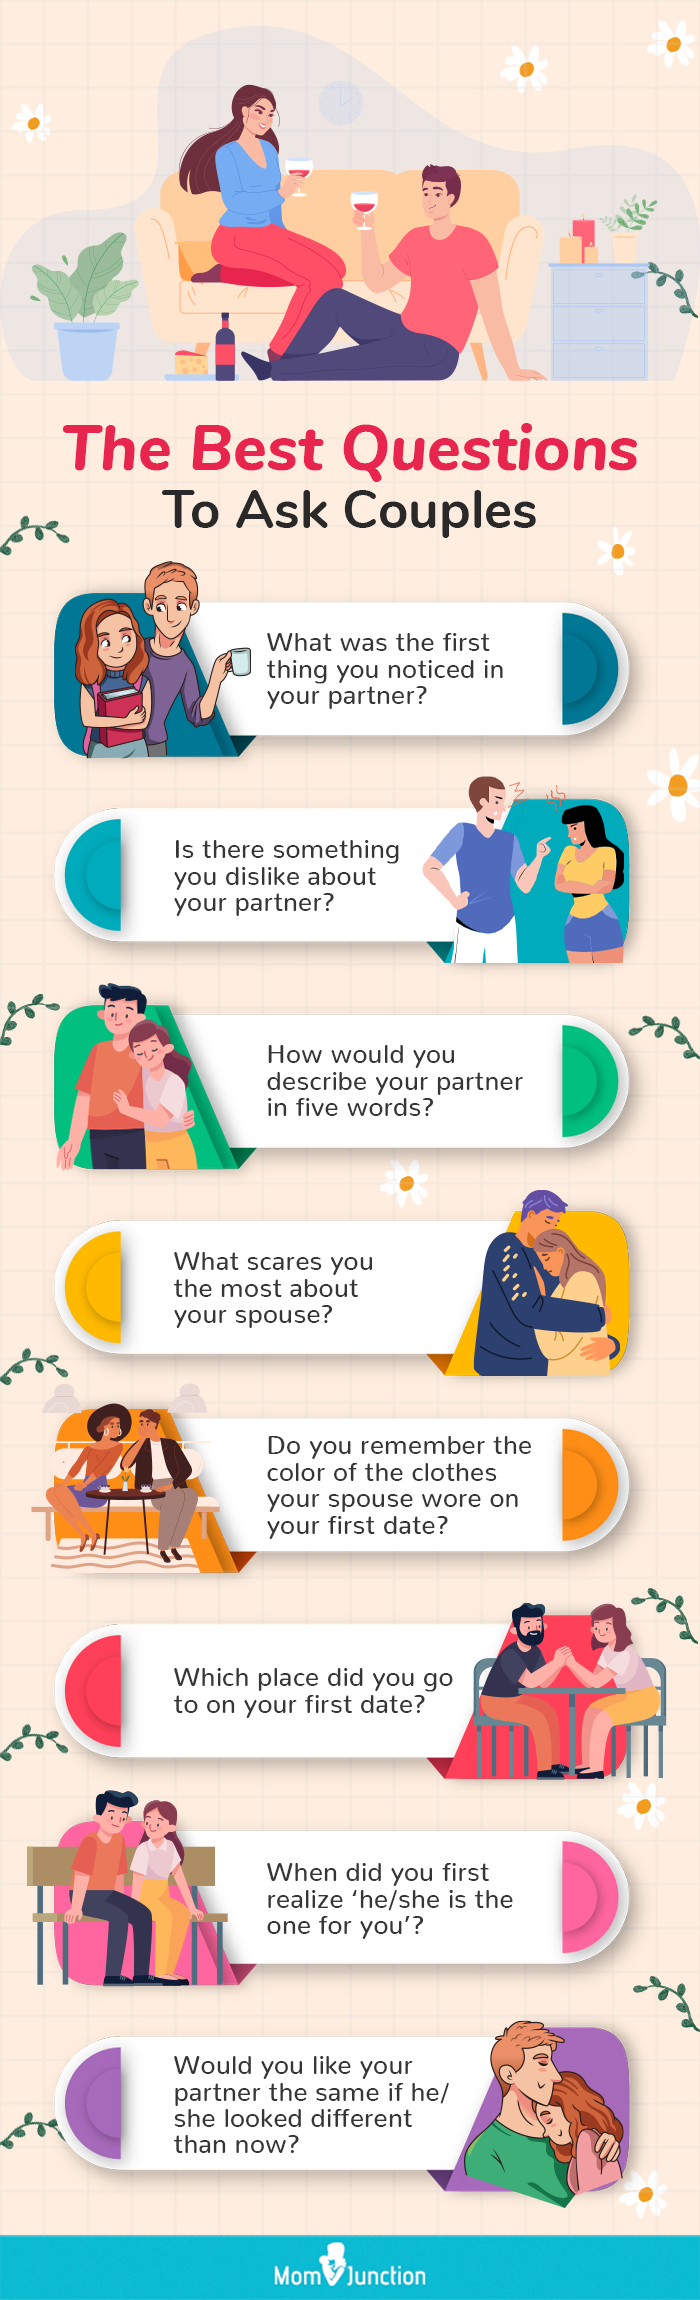 41 Best Fun Games For Couples